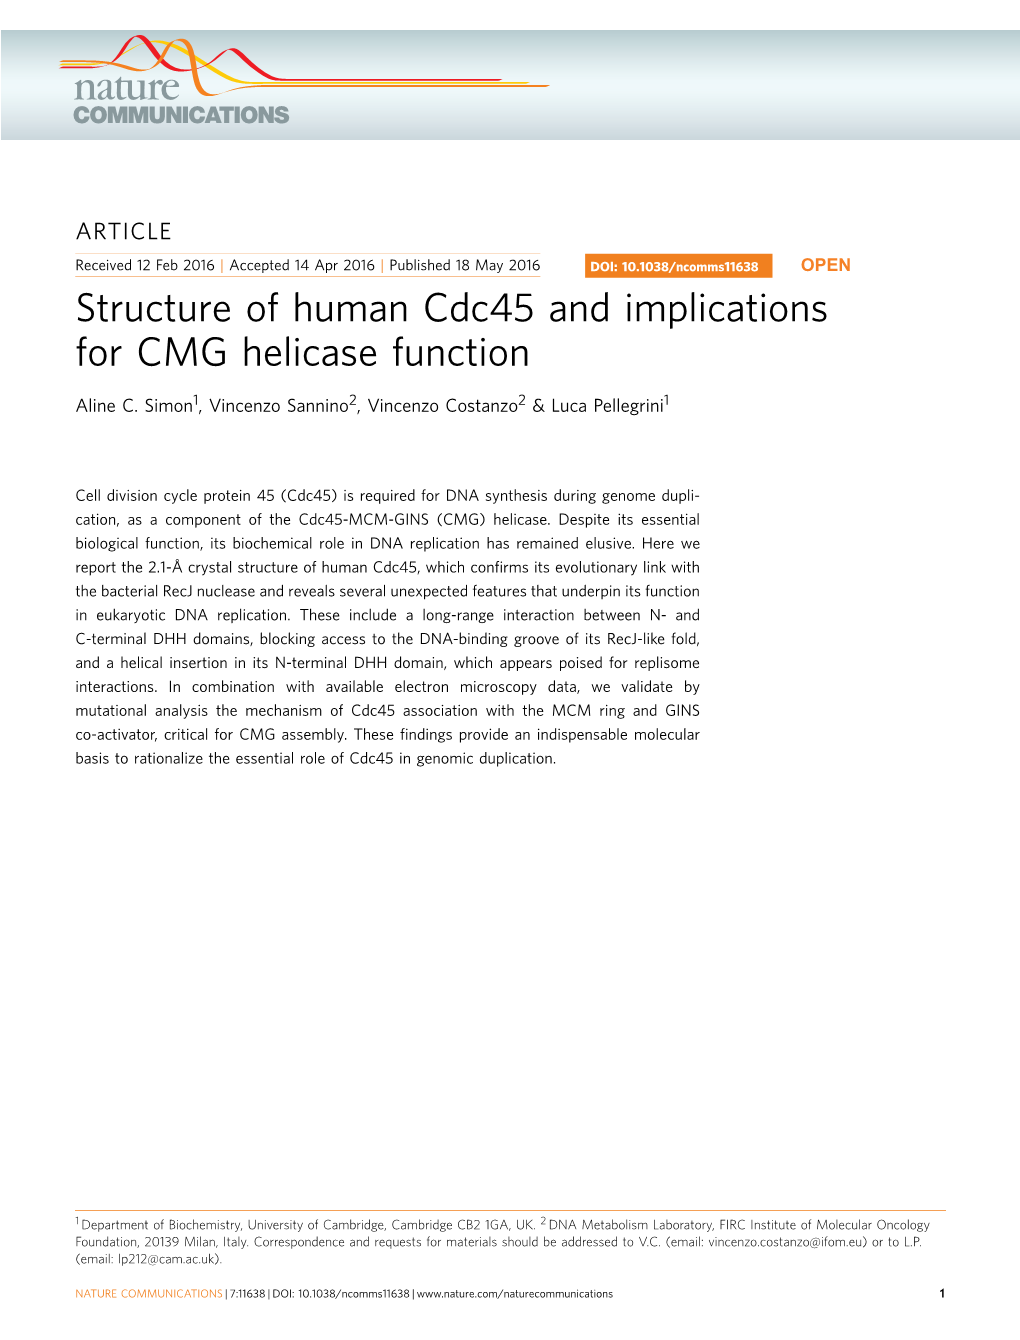 Structure of Human Cdc45 and Implications for CMG Helicase Function